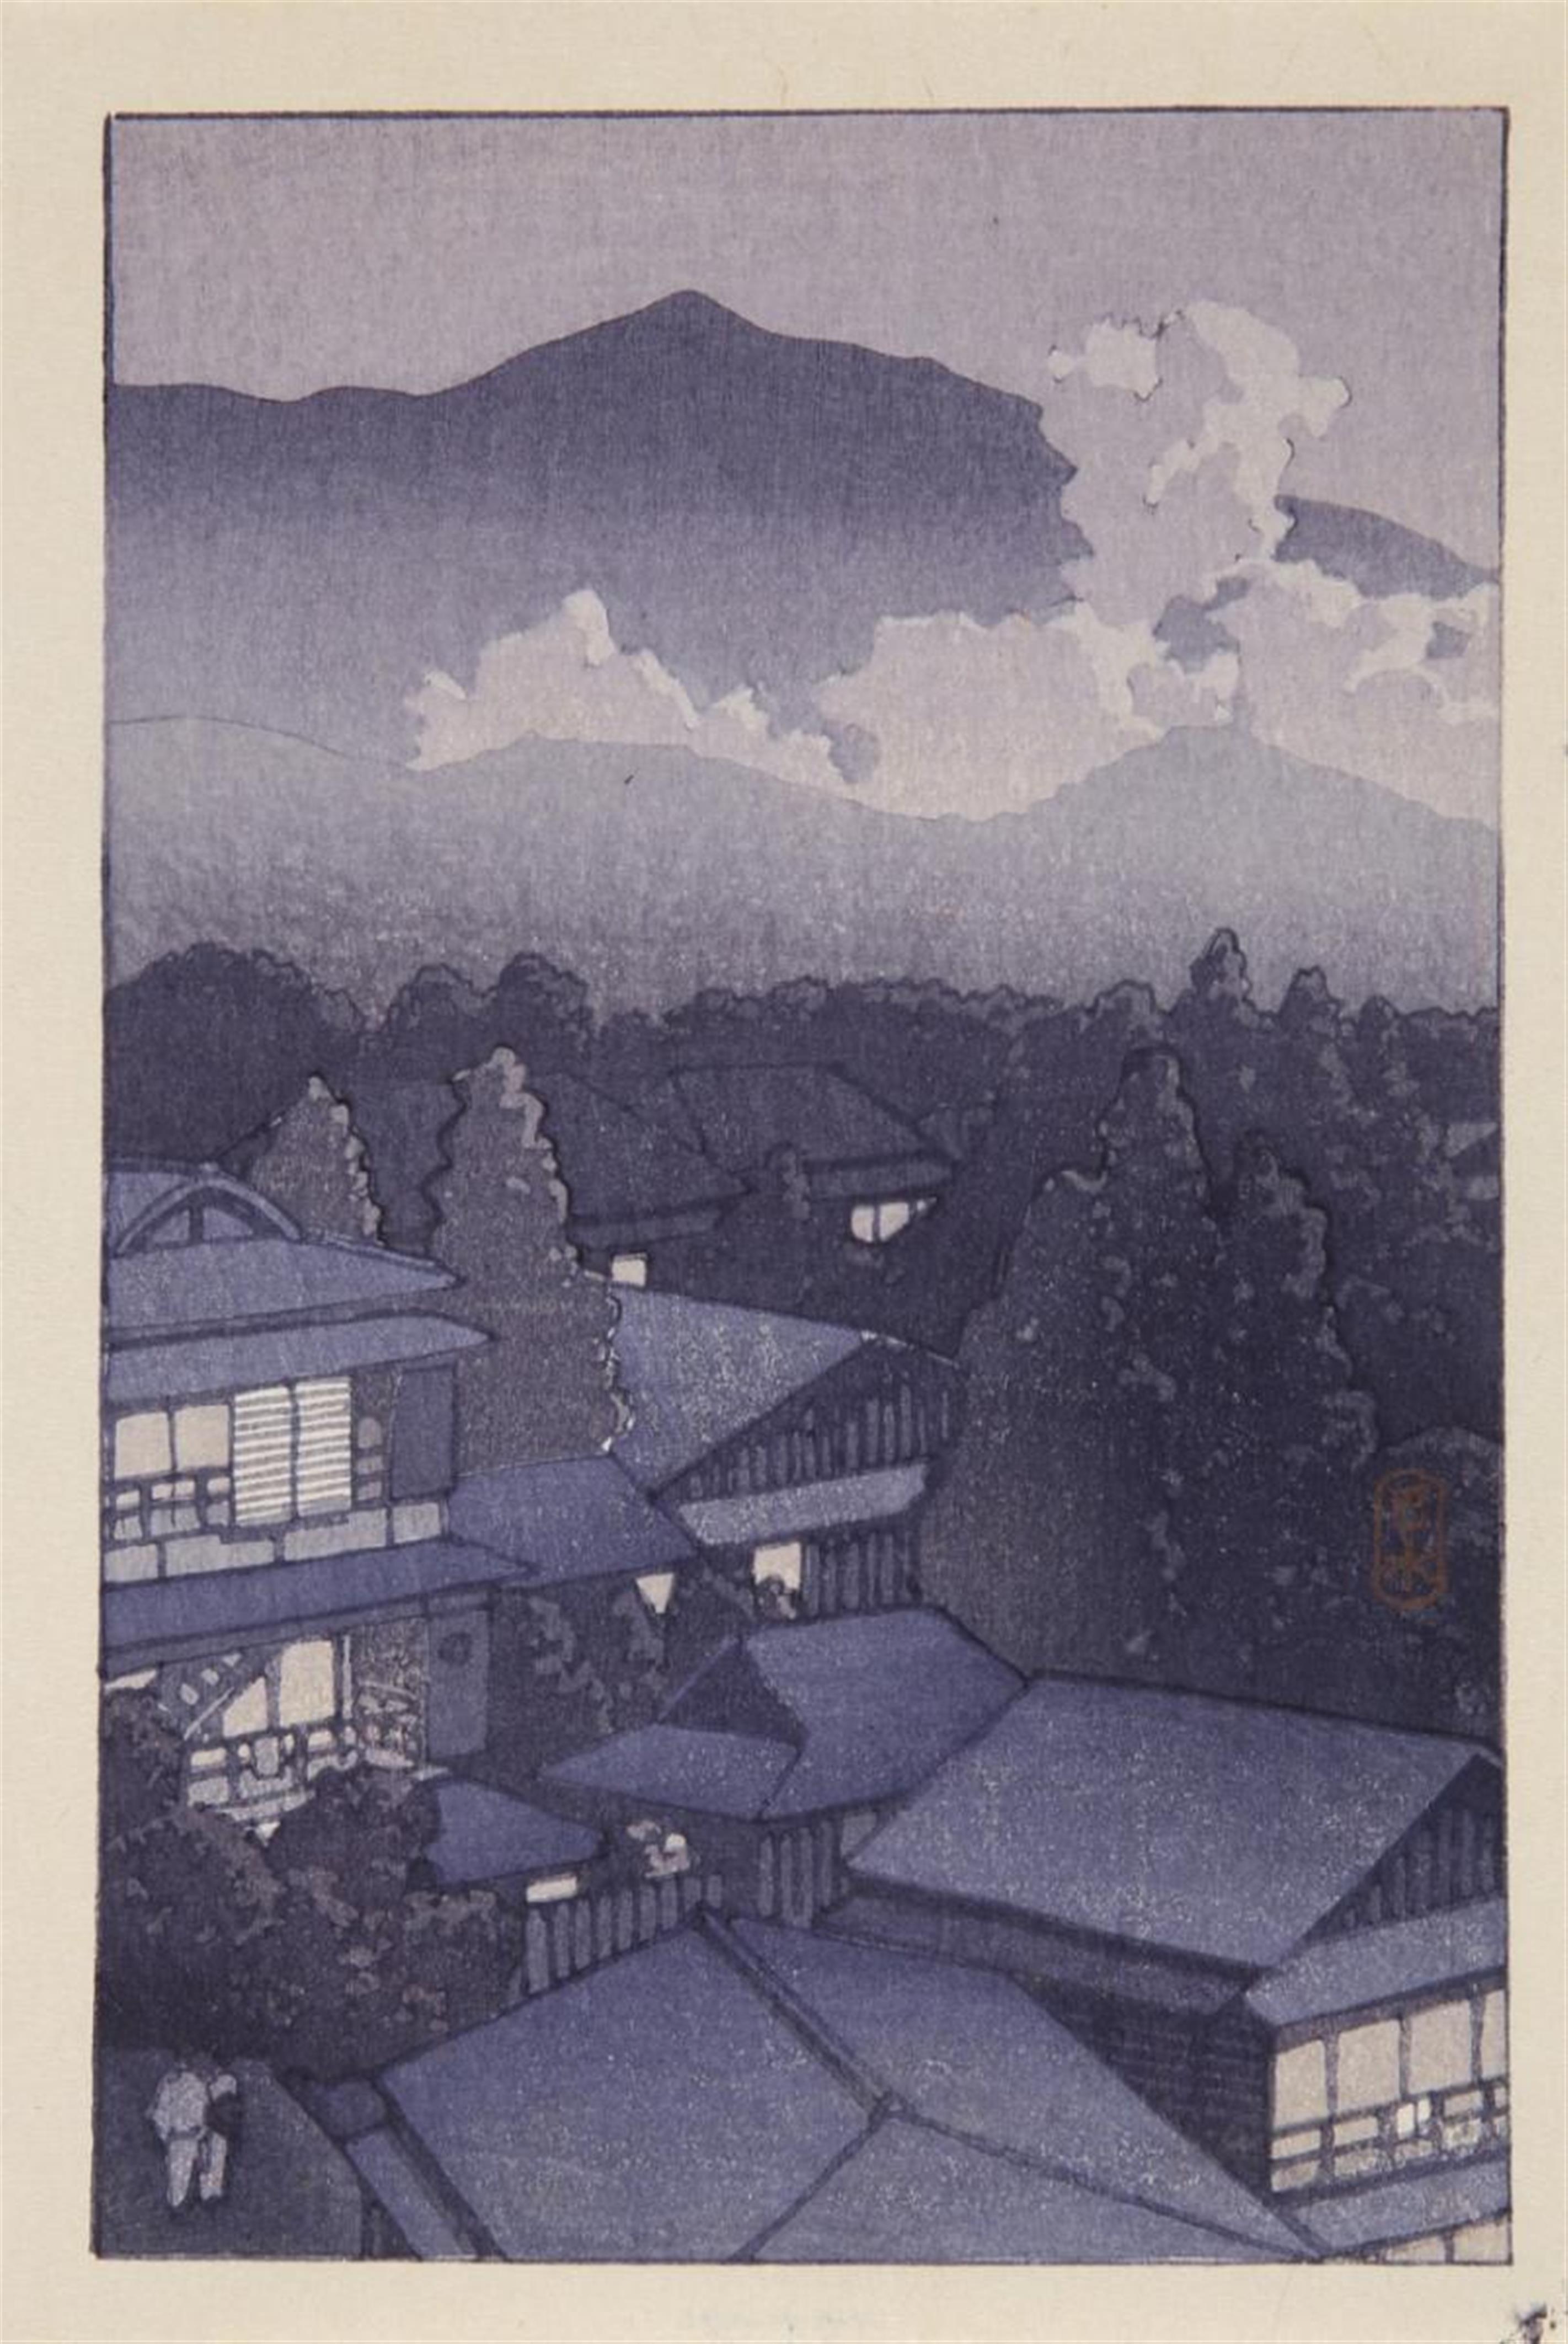 Kawase Hasui - Group of 18 postcard prints. Different sizes (17.7 x 11.5 cm; 15.7 x 10.5 cm; 9.9 x 15 cm) and one double postcard format. Landscapes and cityscapes through the seasons. Seals: ... - image-5